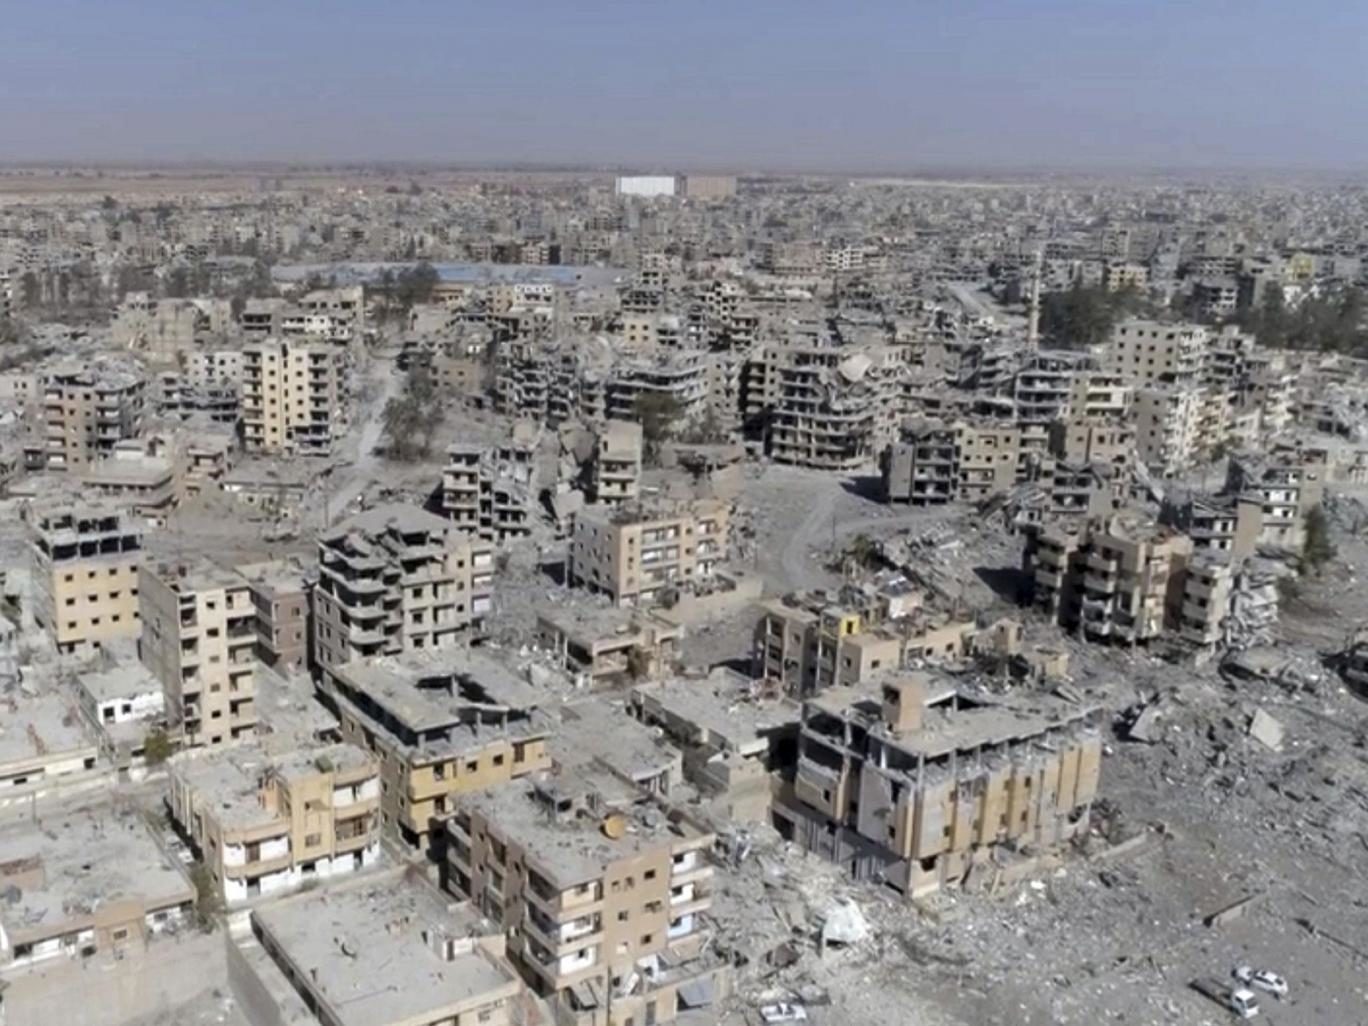 The remains of Raqqa